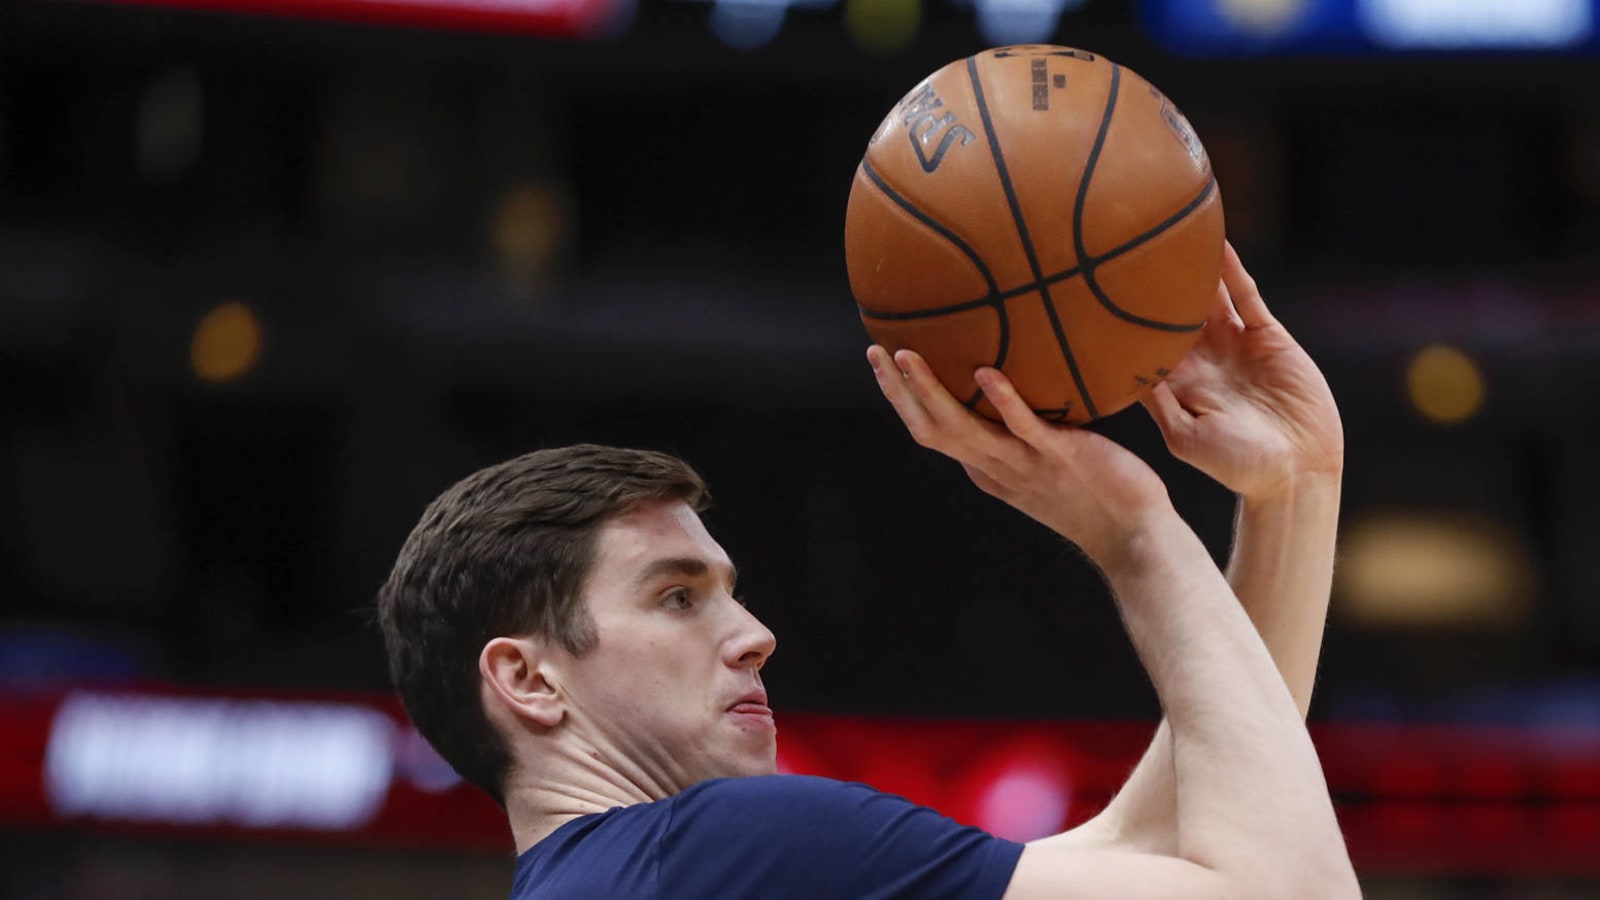 Blazers to add T.J. Leaf on two-way contract